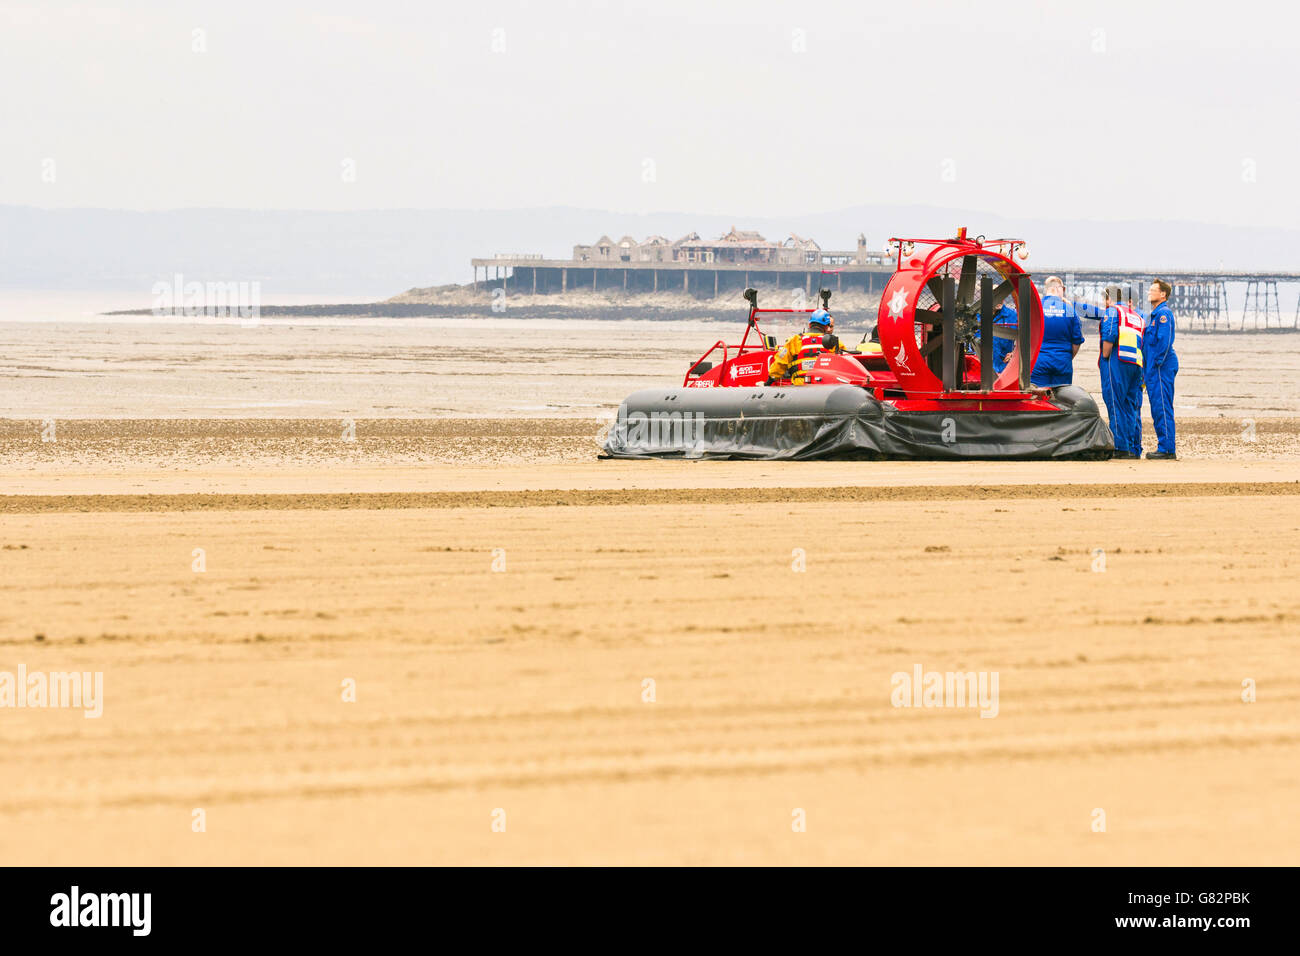 Avon fire and rescue hovercraft patrolling the beach during the Weston Air Festival, UK, 18th June 2016. Stock Photo